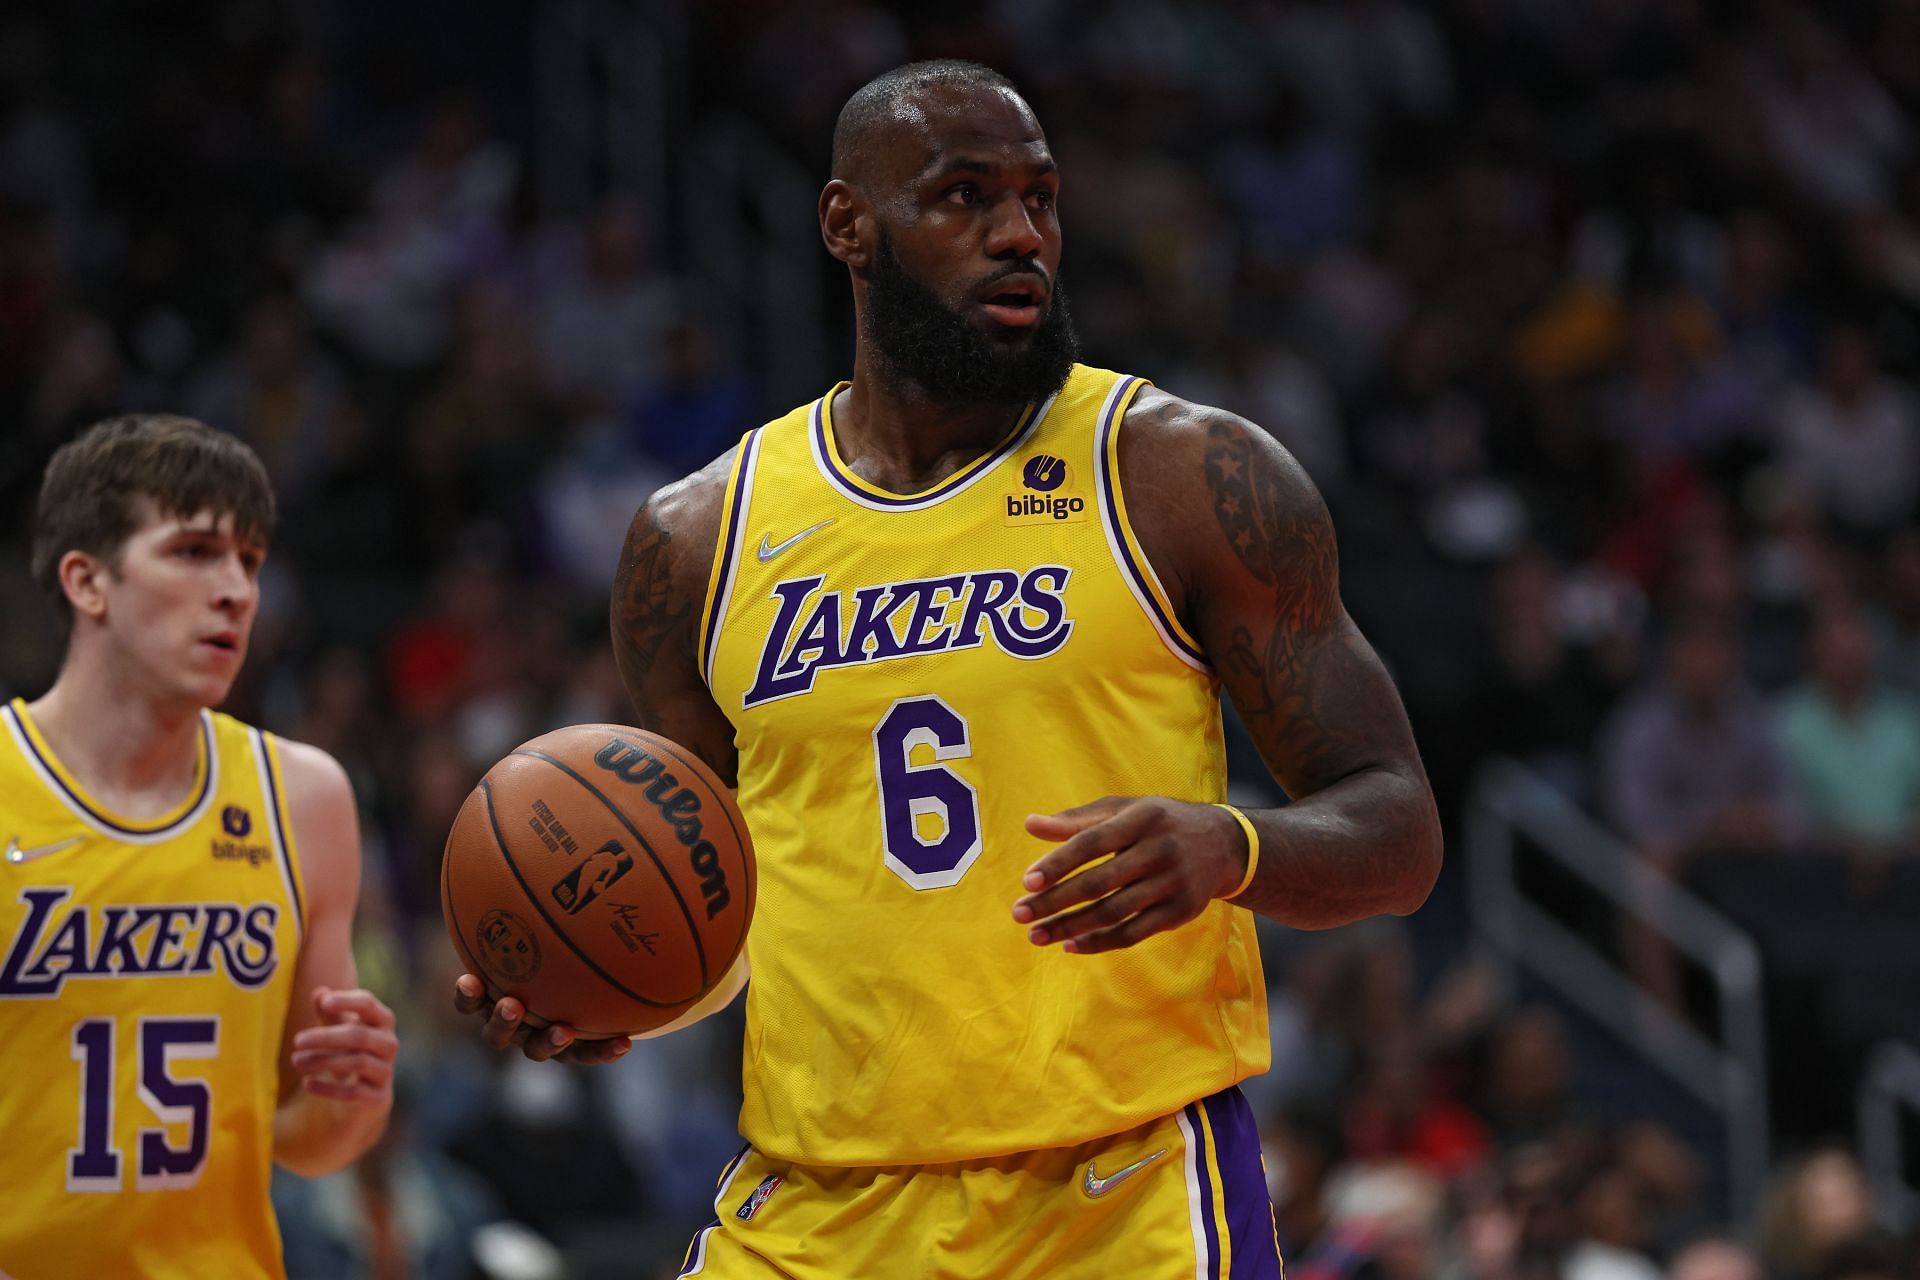 Nick Wright believes LeBron James deserves more praise for his efforts